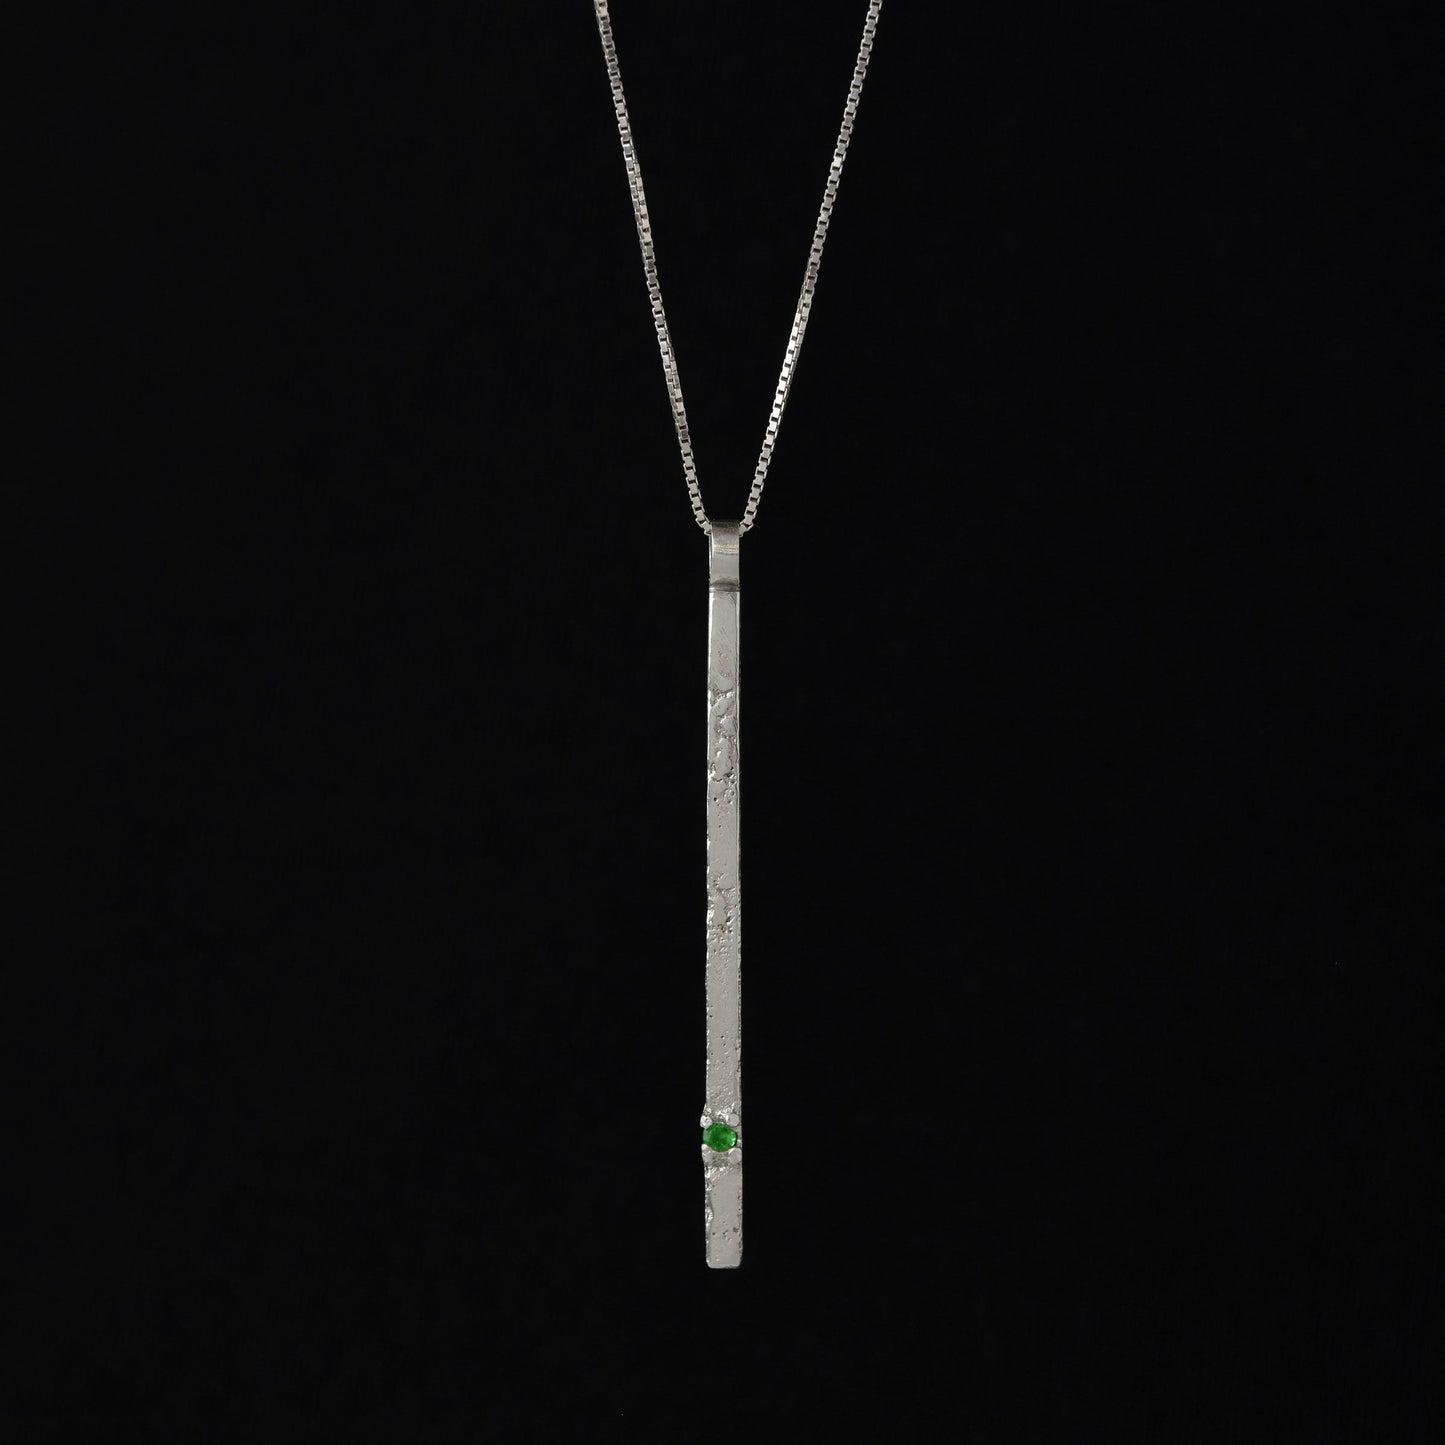 Zosma - Sterling Silver Monolith Necklace With A Green Gemstone